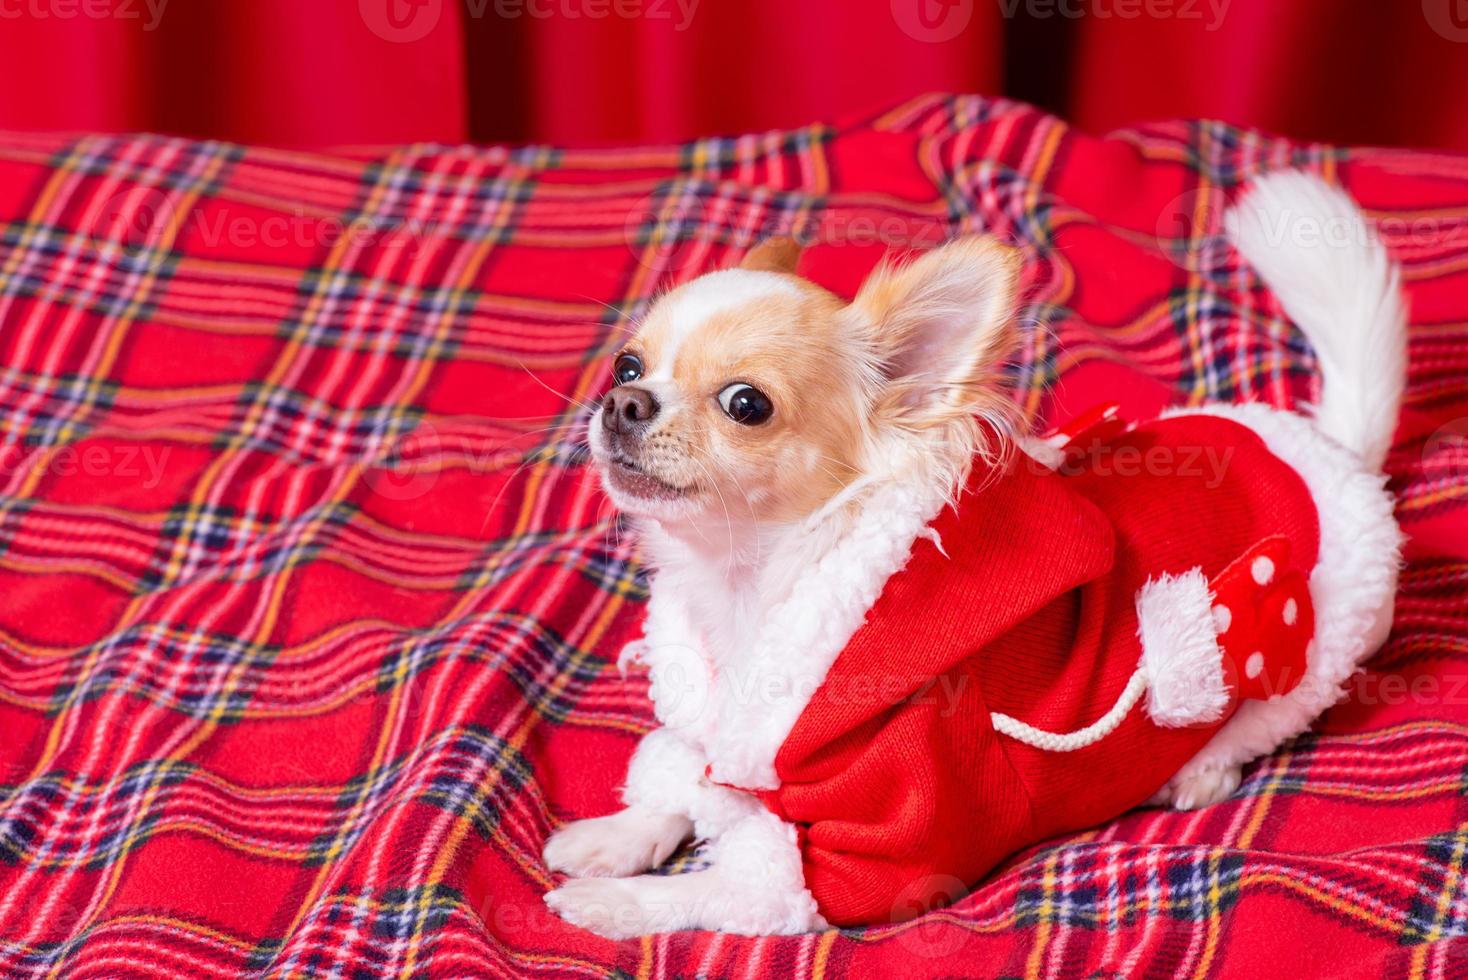 A mini chihuahua dog in Santa's clothes lies on a red checkered blanket. Long-haired chihuahua. photo